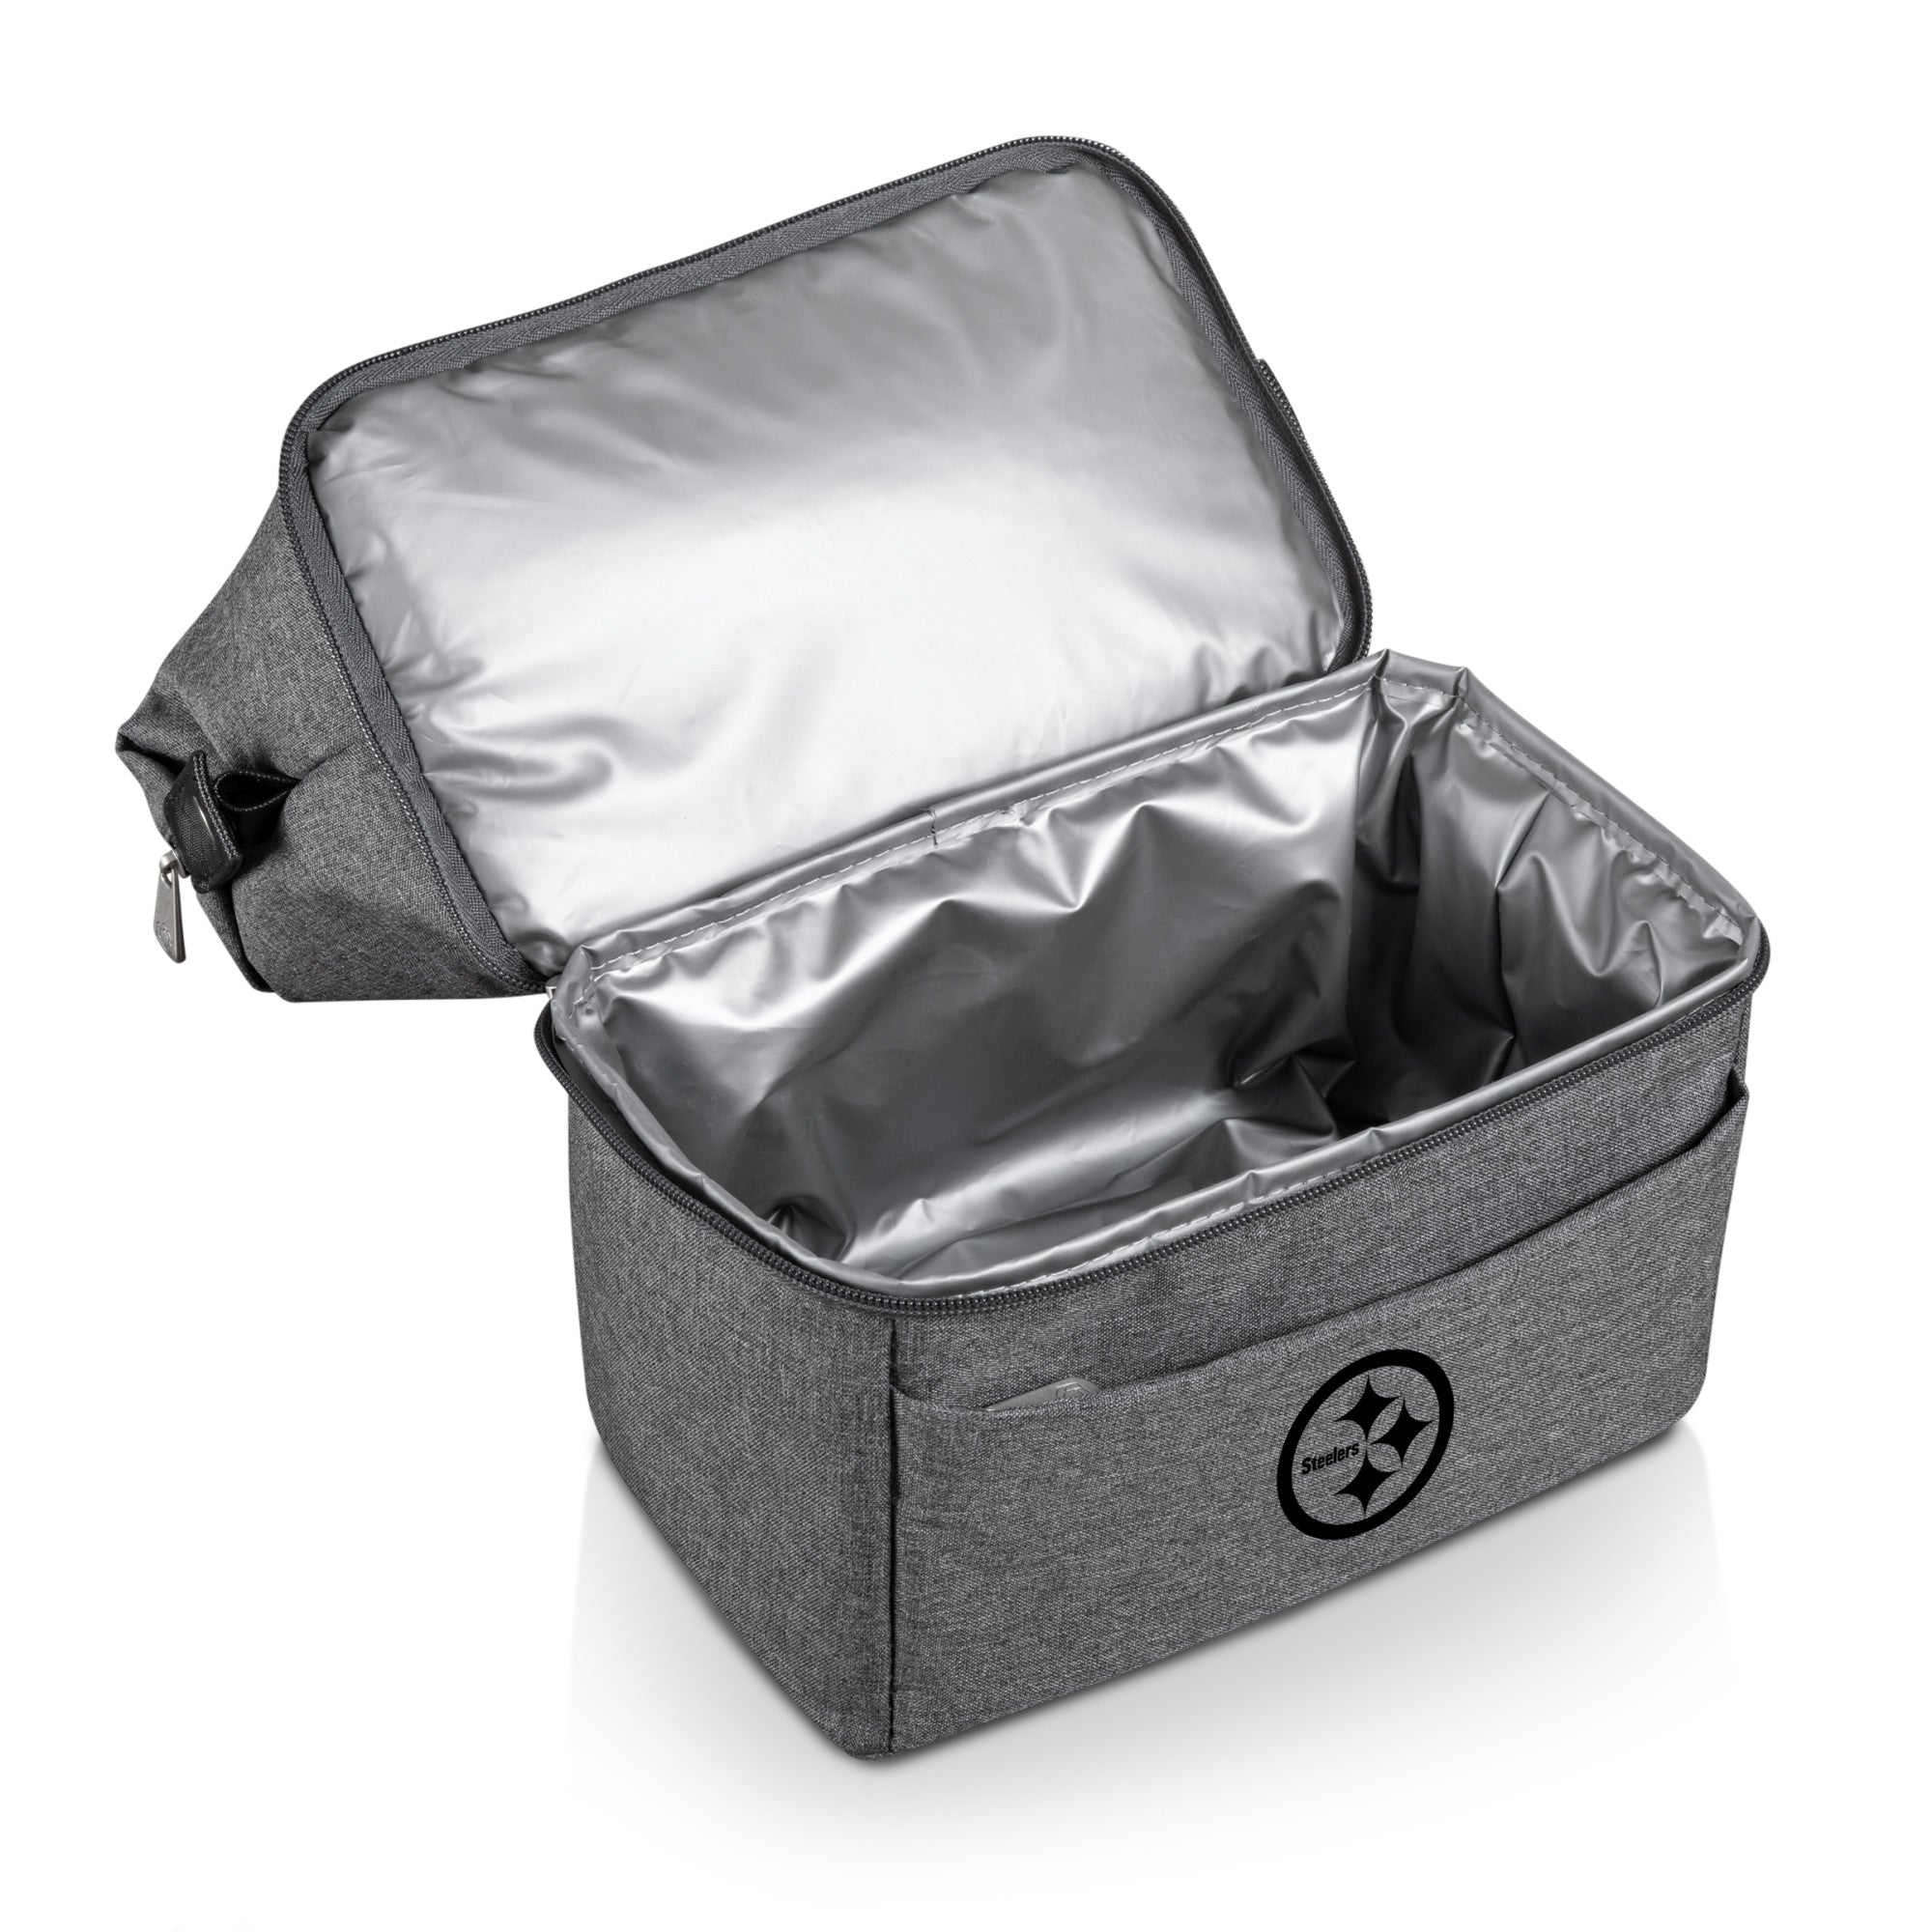 Pittsburgh Steelers - Urban Lunch Bag Cooler